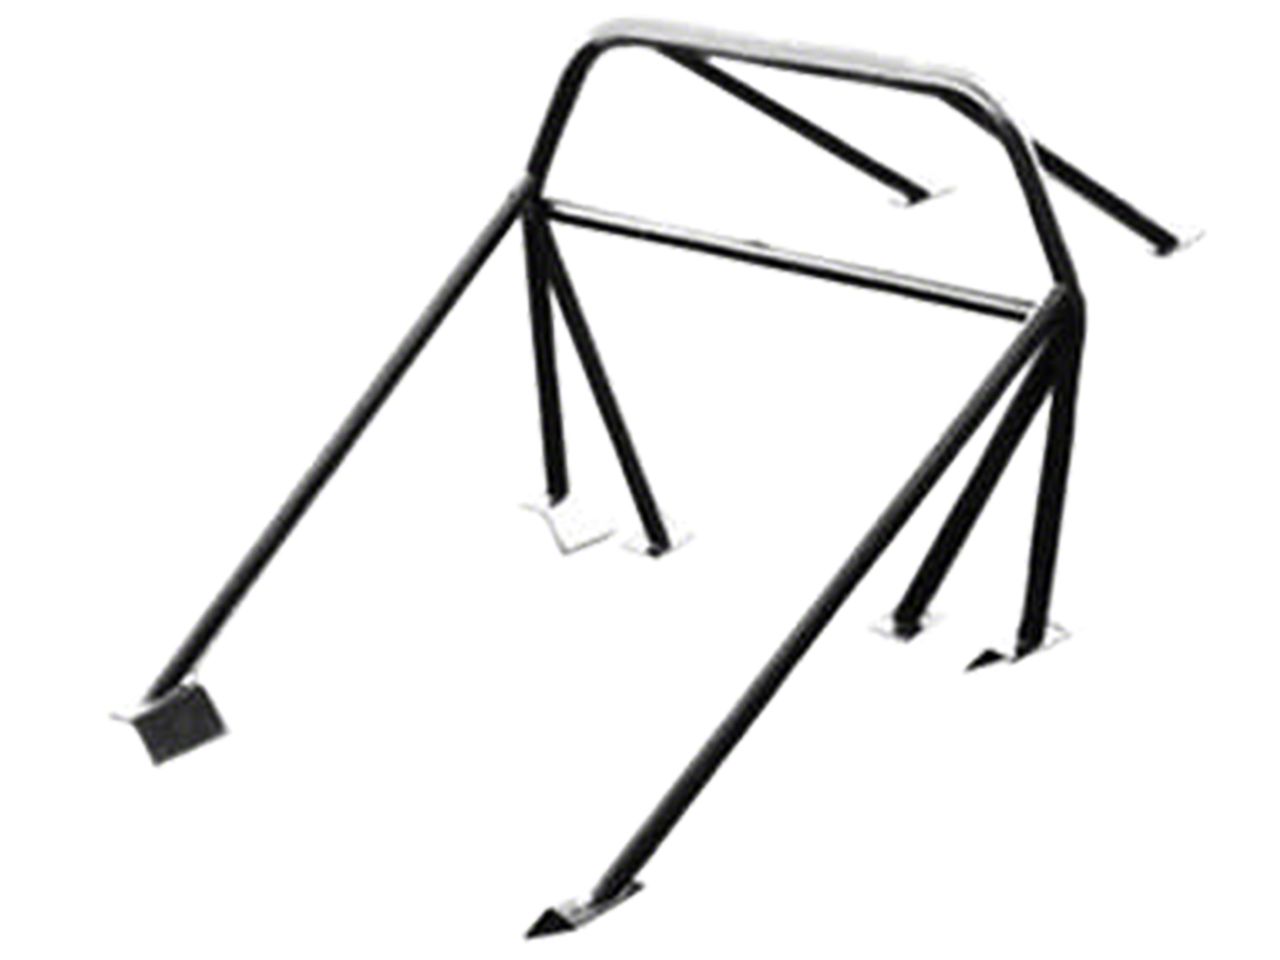 Camaro Roll Bars & Roll Cages 1982-1992